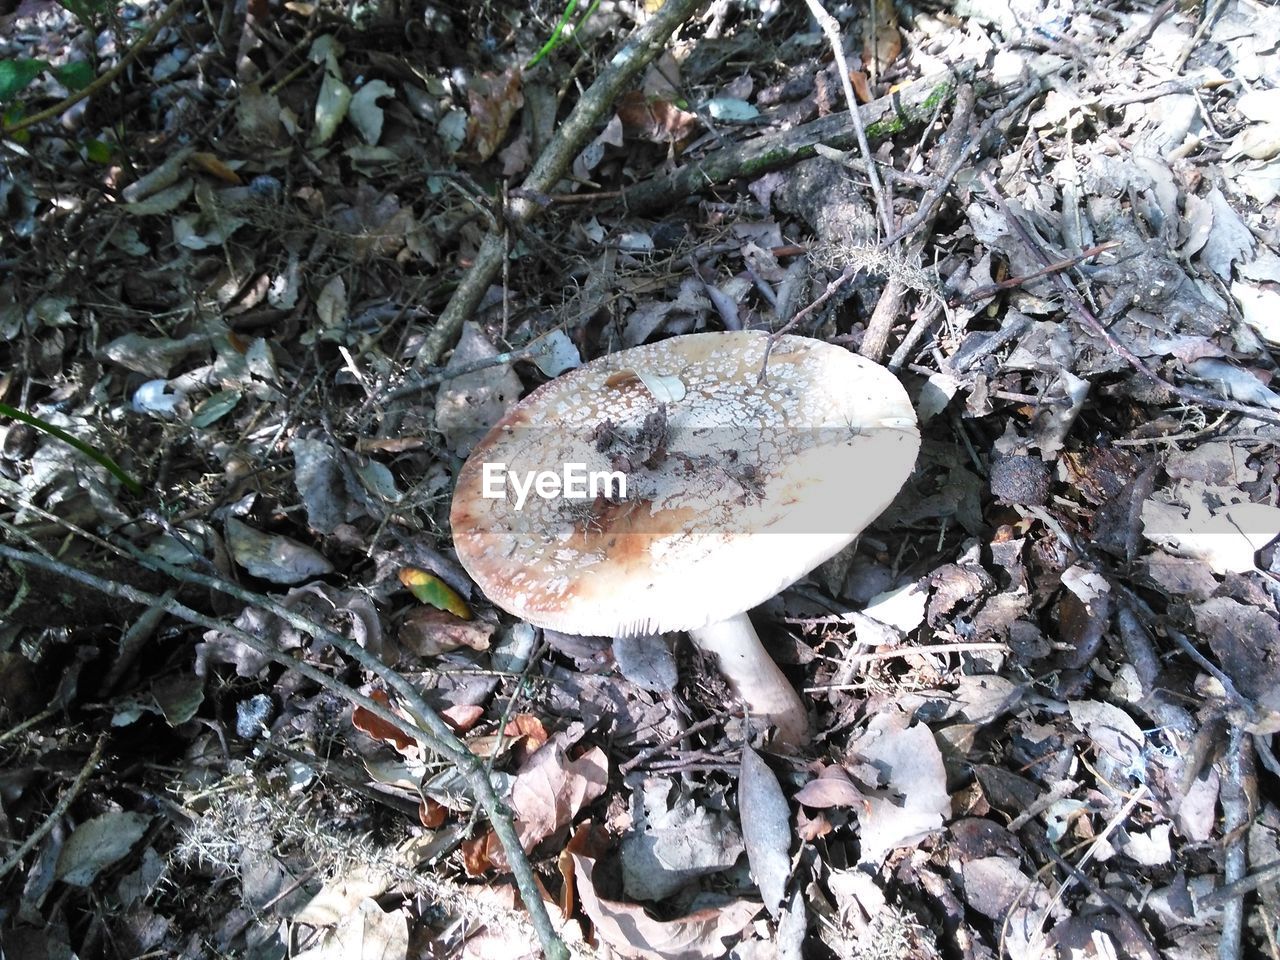 HIGH ANGLE VIEW OF MUSHROOMS ON FIELD